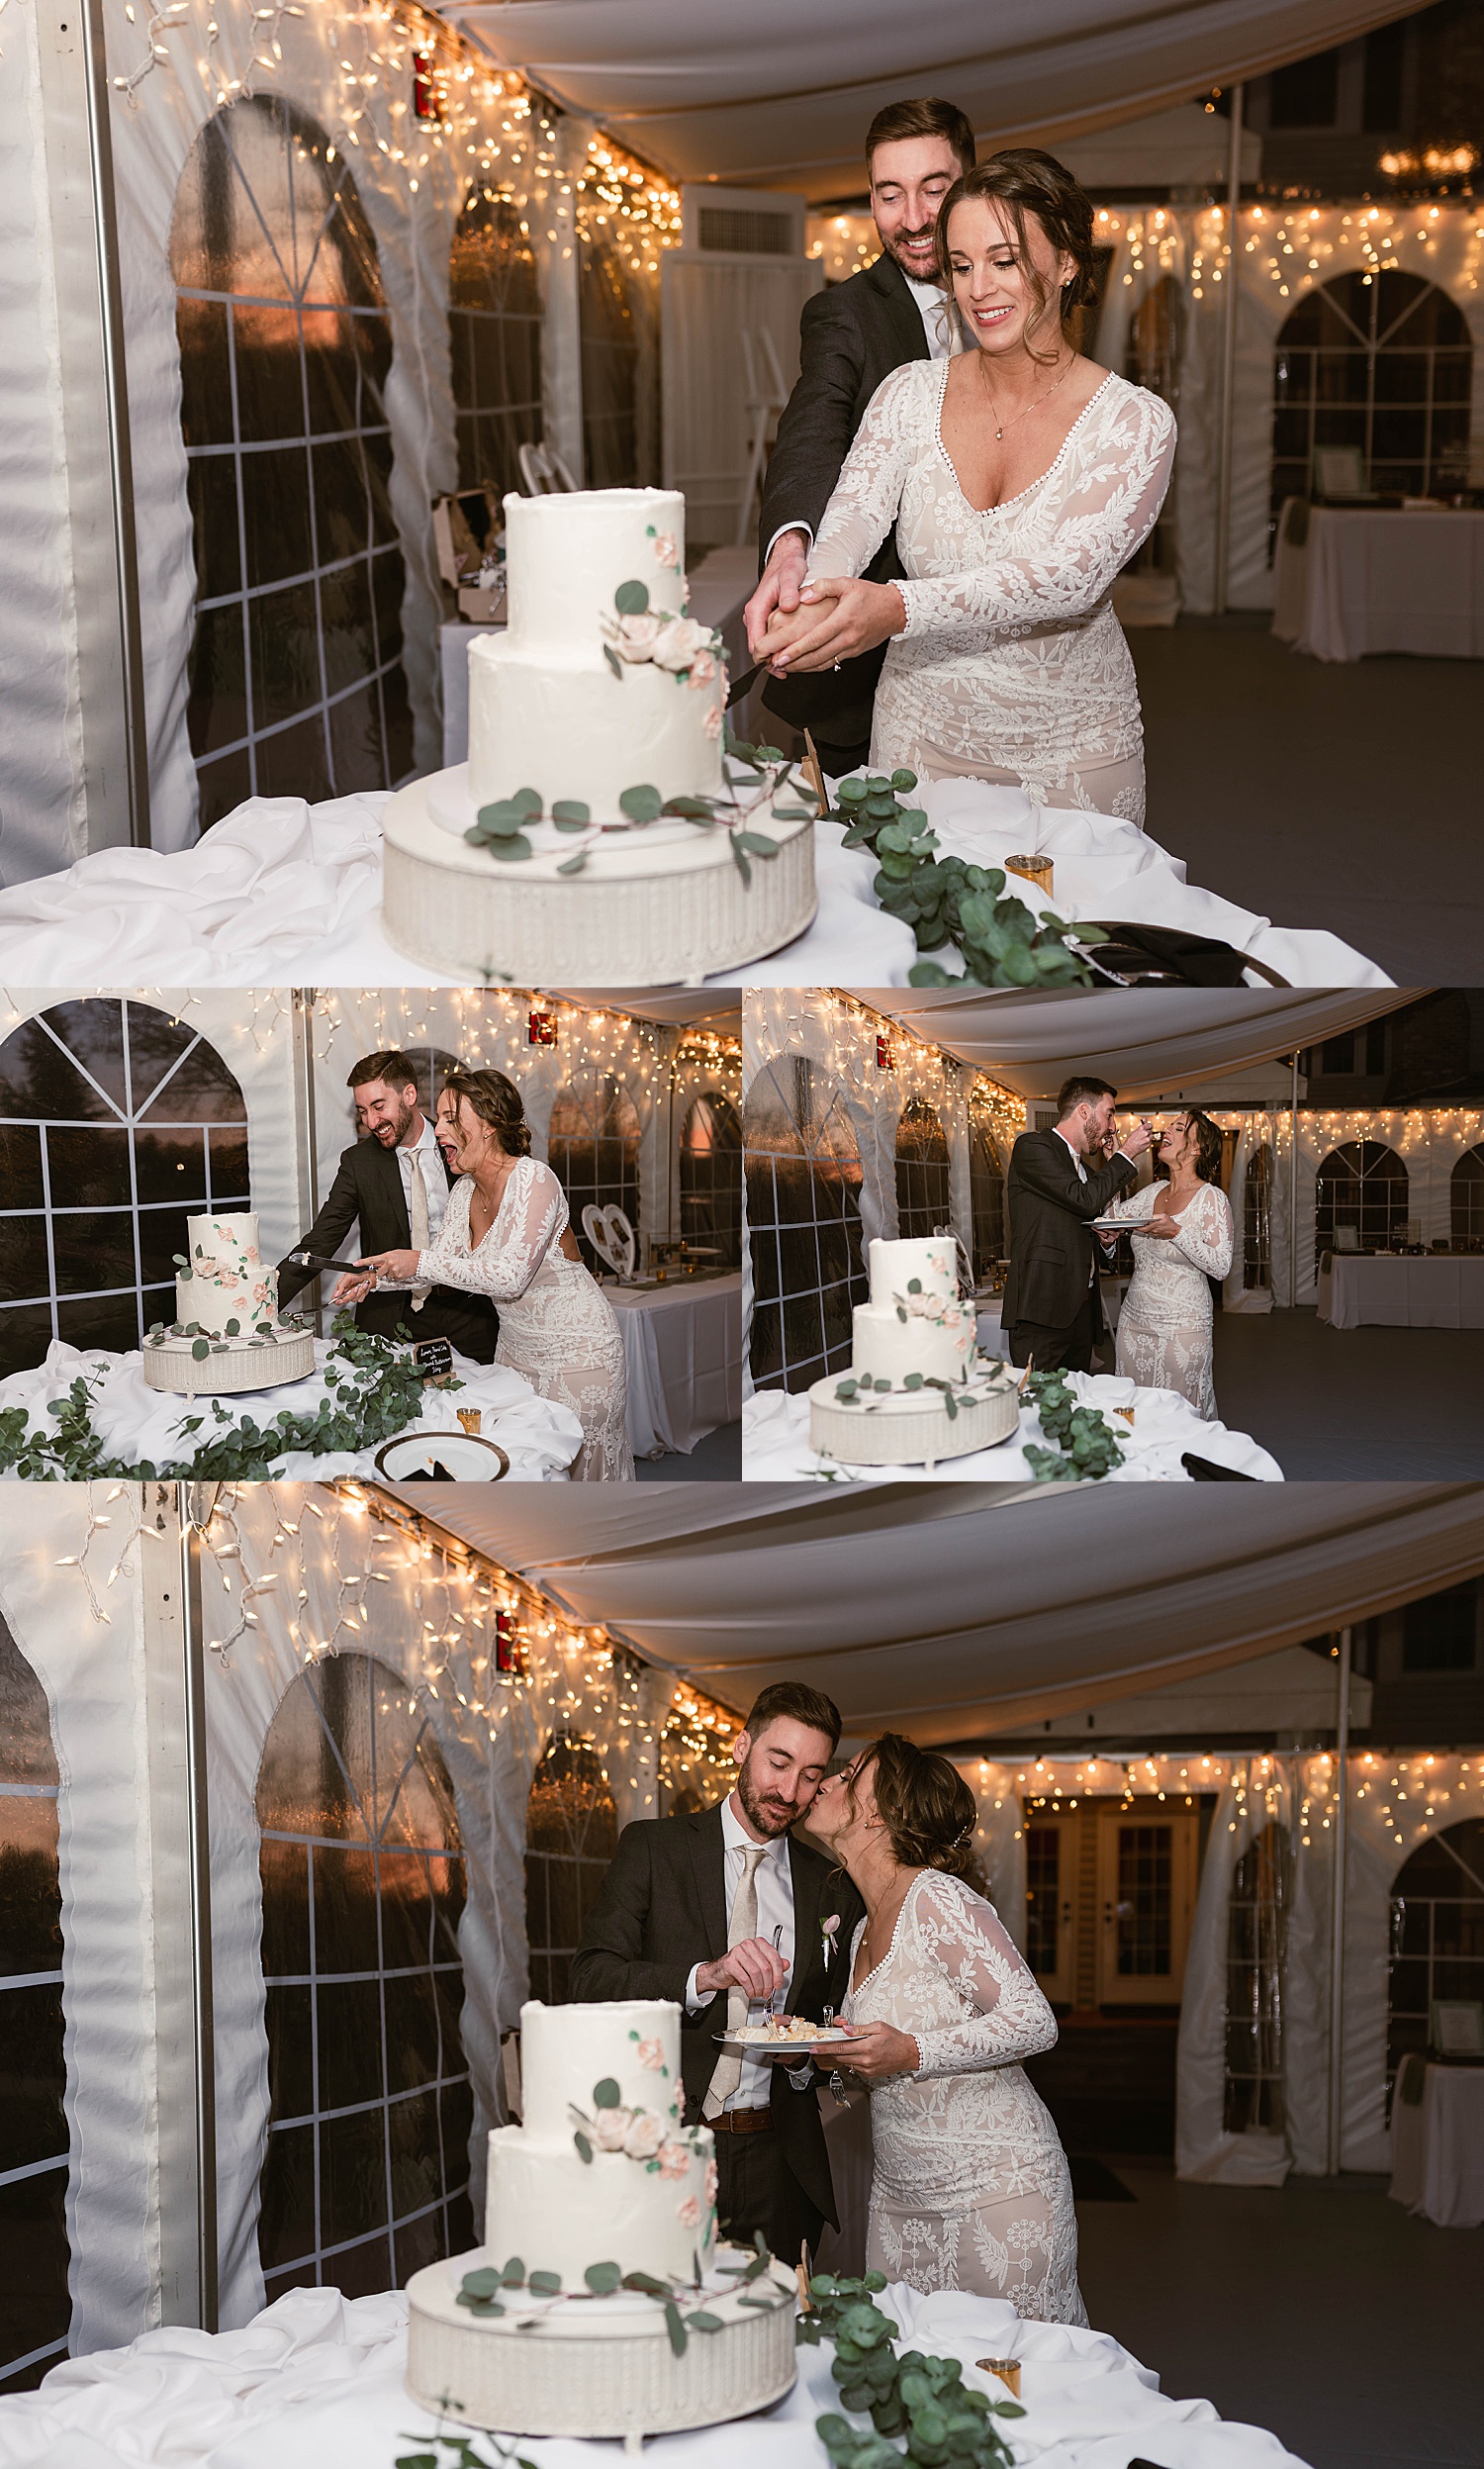 Newlyweds cutting cake and feeding to each other by Virginia Wedding Photographer 